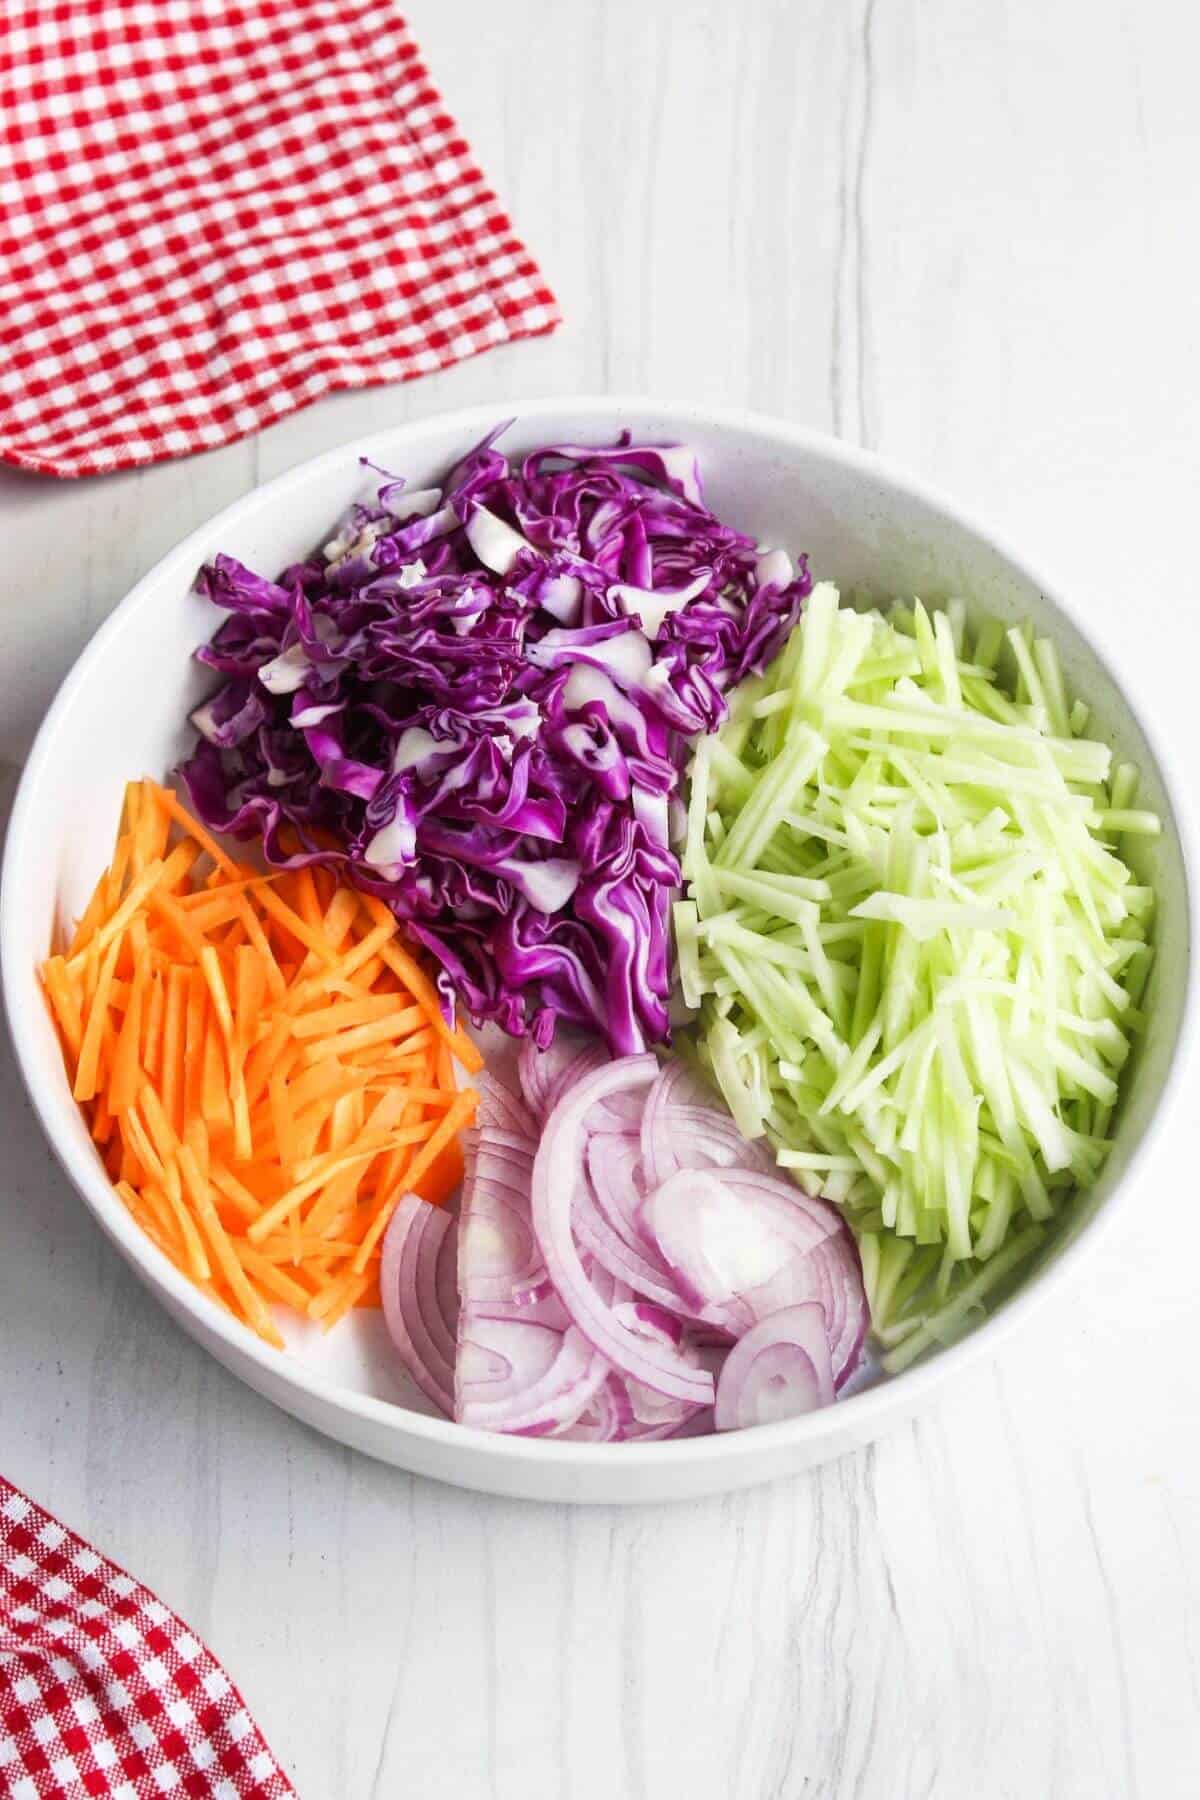 Shredded cabbage and carrots with sliced red onion and red cabbage in a bowl.